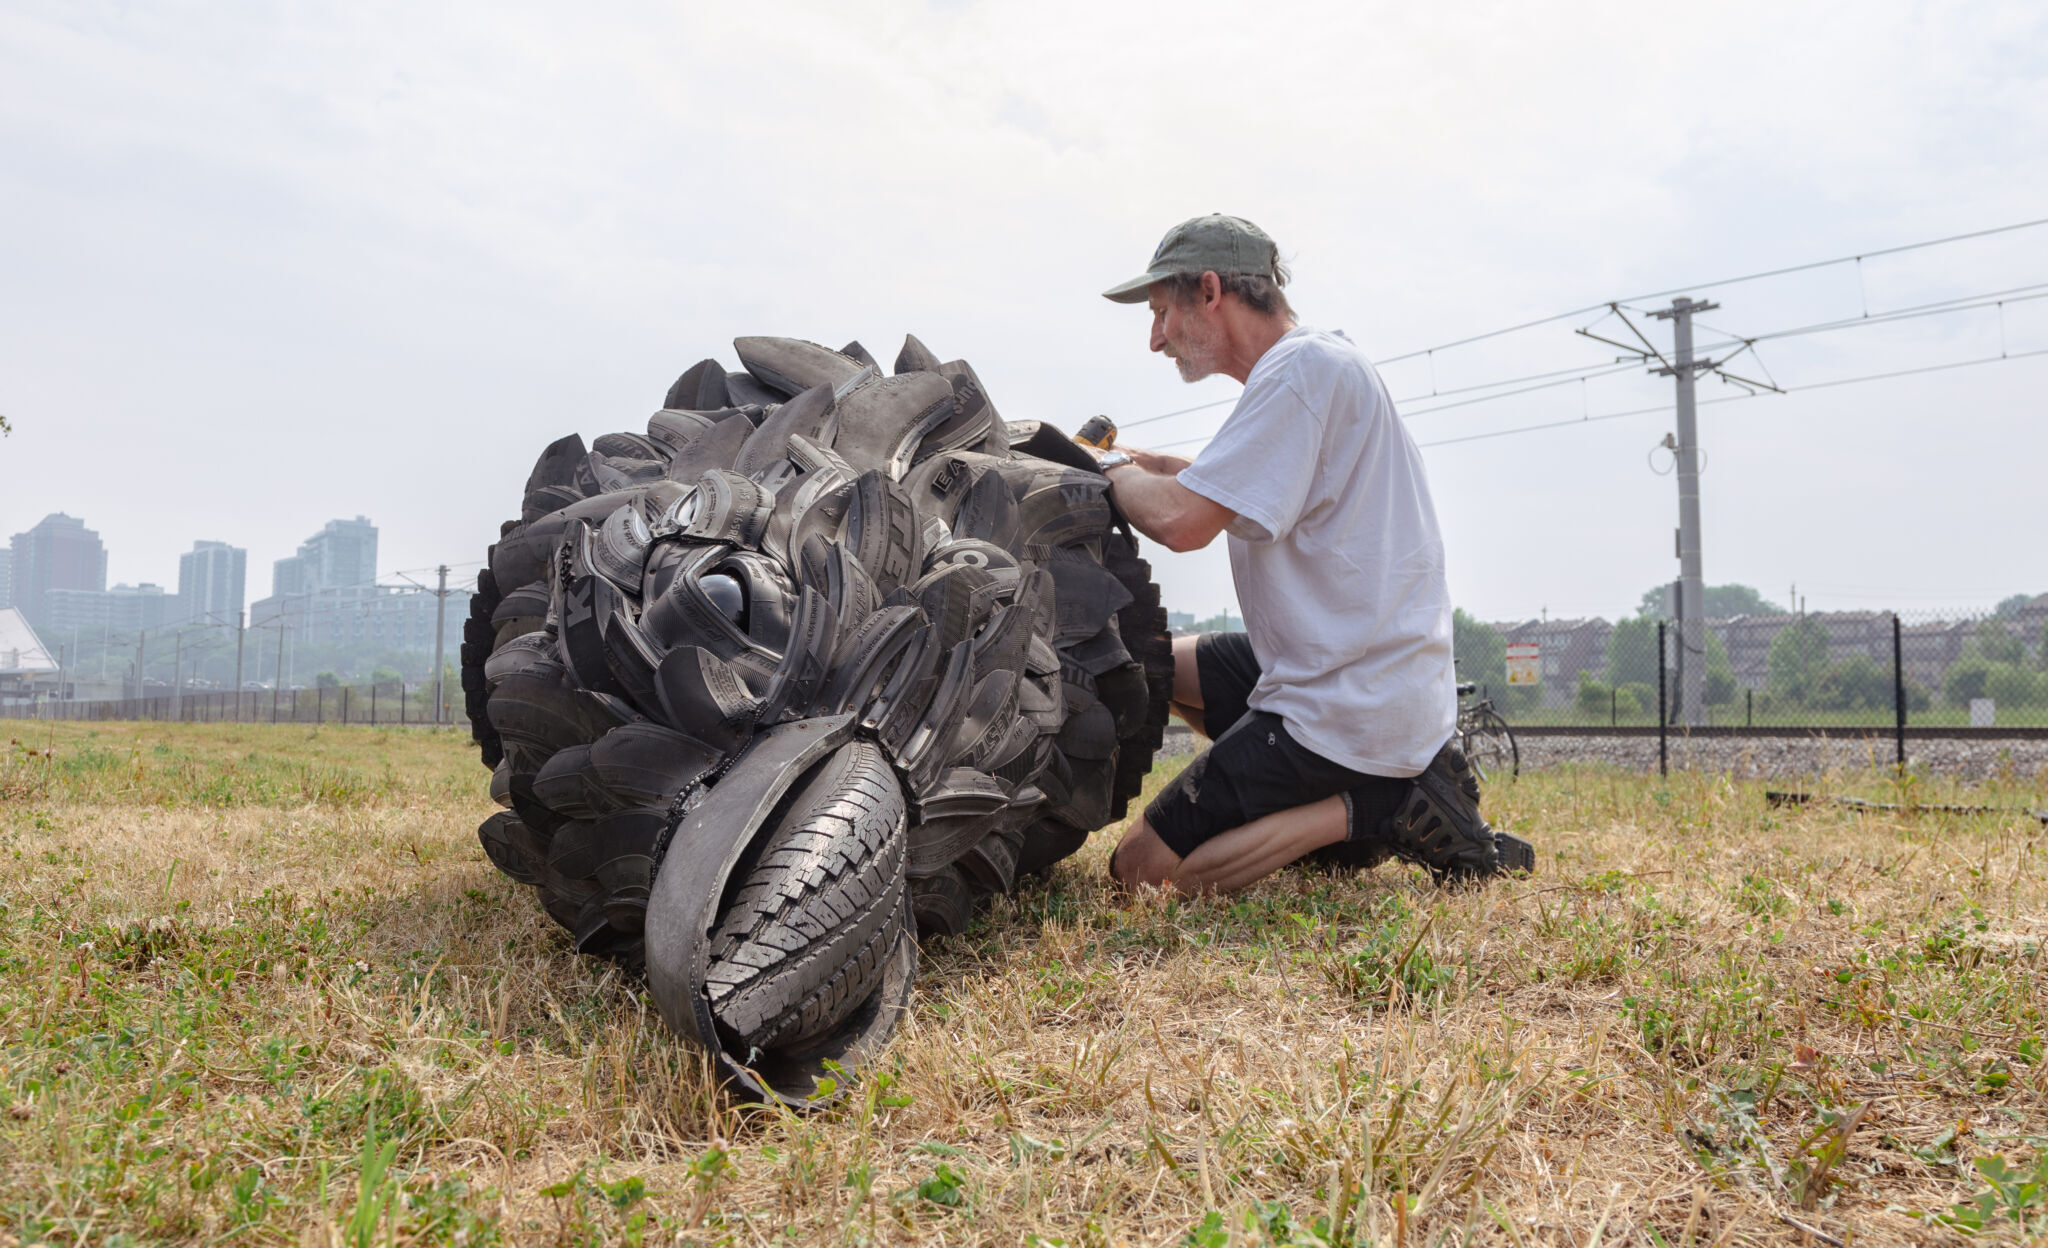 Artist on his knees installing parts on his sculpture, a 16-foot crow made of recycled tires. Front view of the crow lying on the ground.